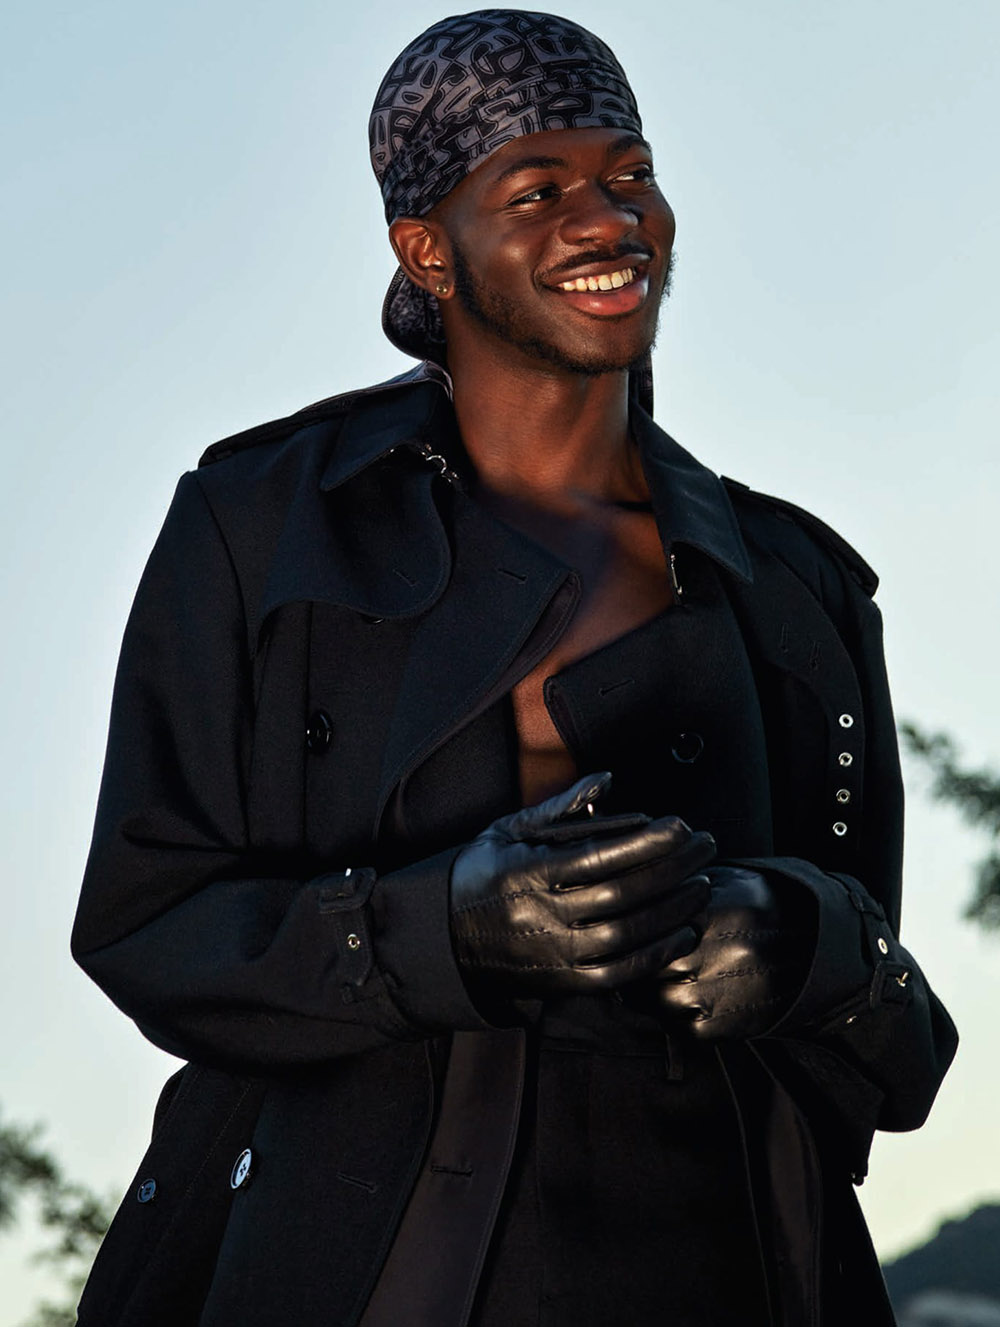 Lil Nas X covers CR MEN Issue 11 by Roe Ethridge